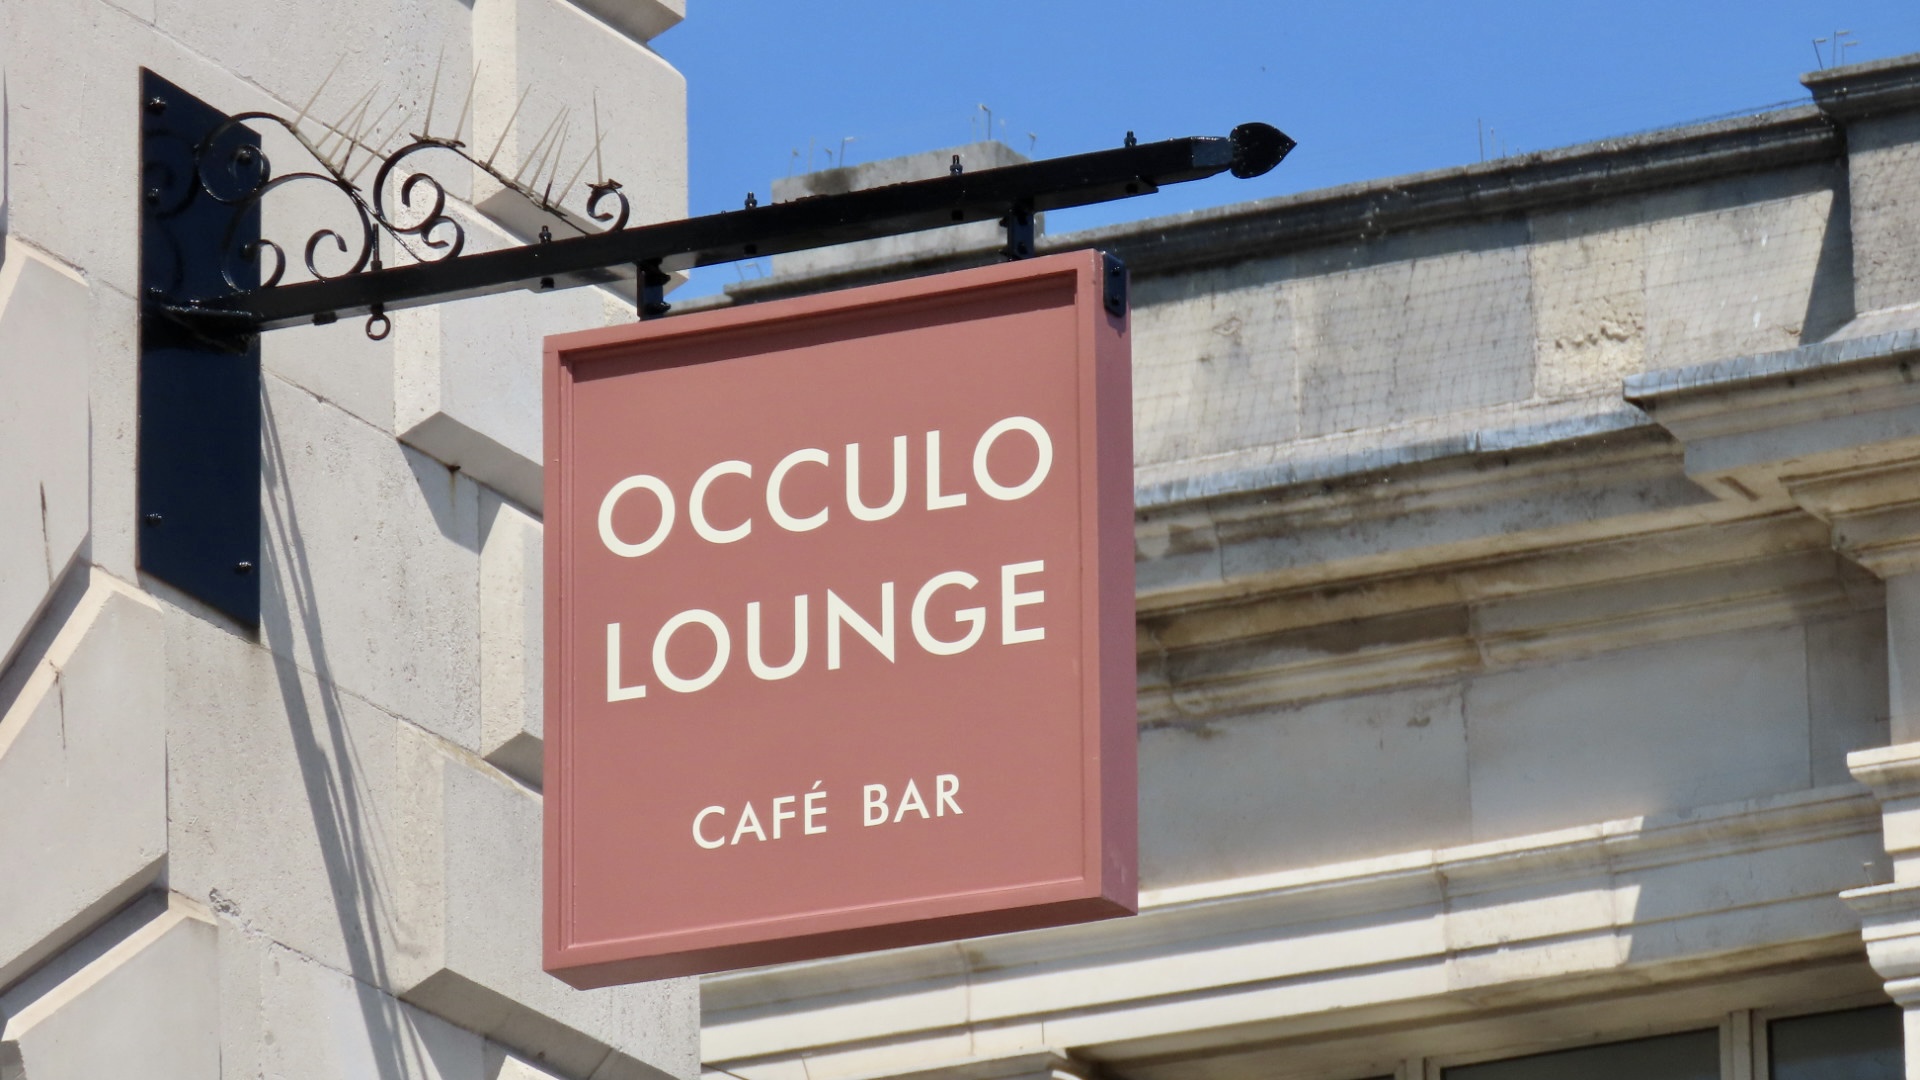 Occulo Lounge on Lord Street in Southport. Photo by Andrew Brown of Stand Up For Southport